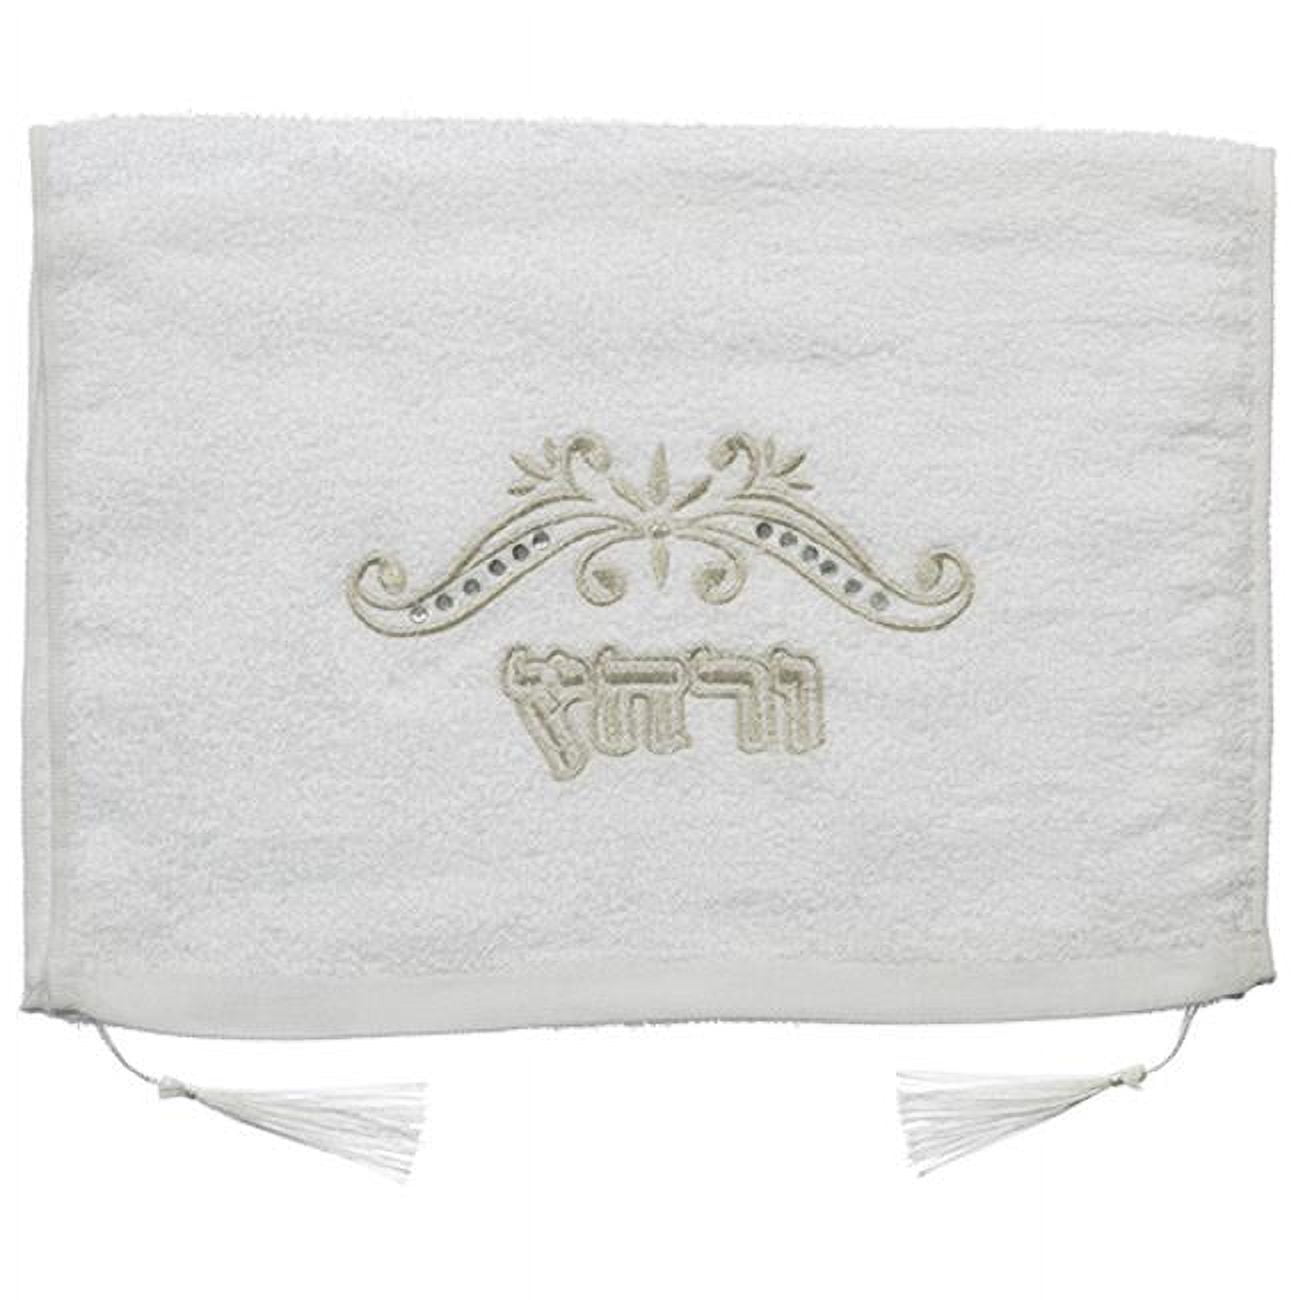 Picture of A&M Judaica 65184 Towel for Passover with Embroidery - 30 x 13 in.